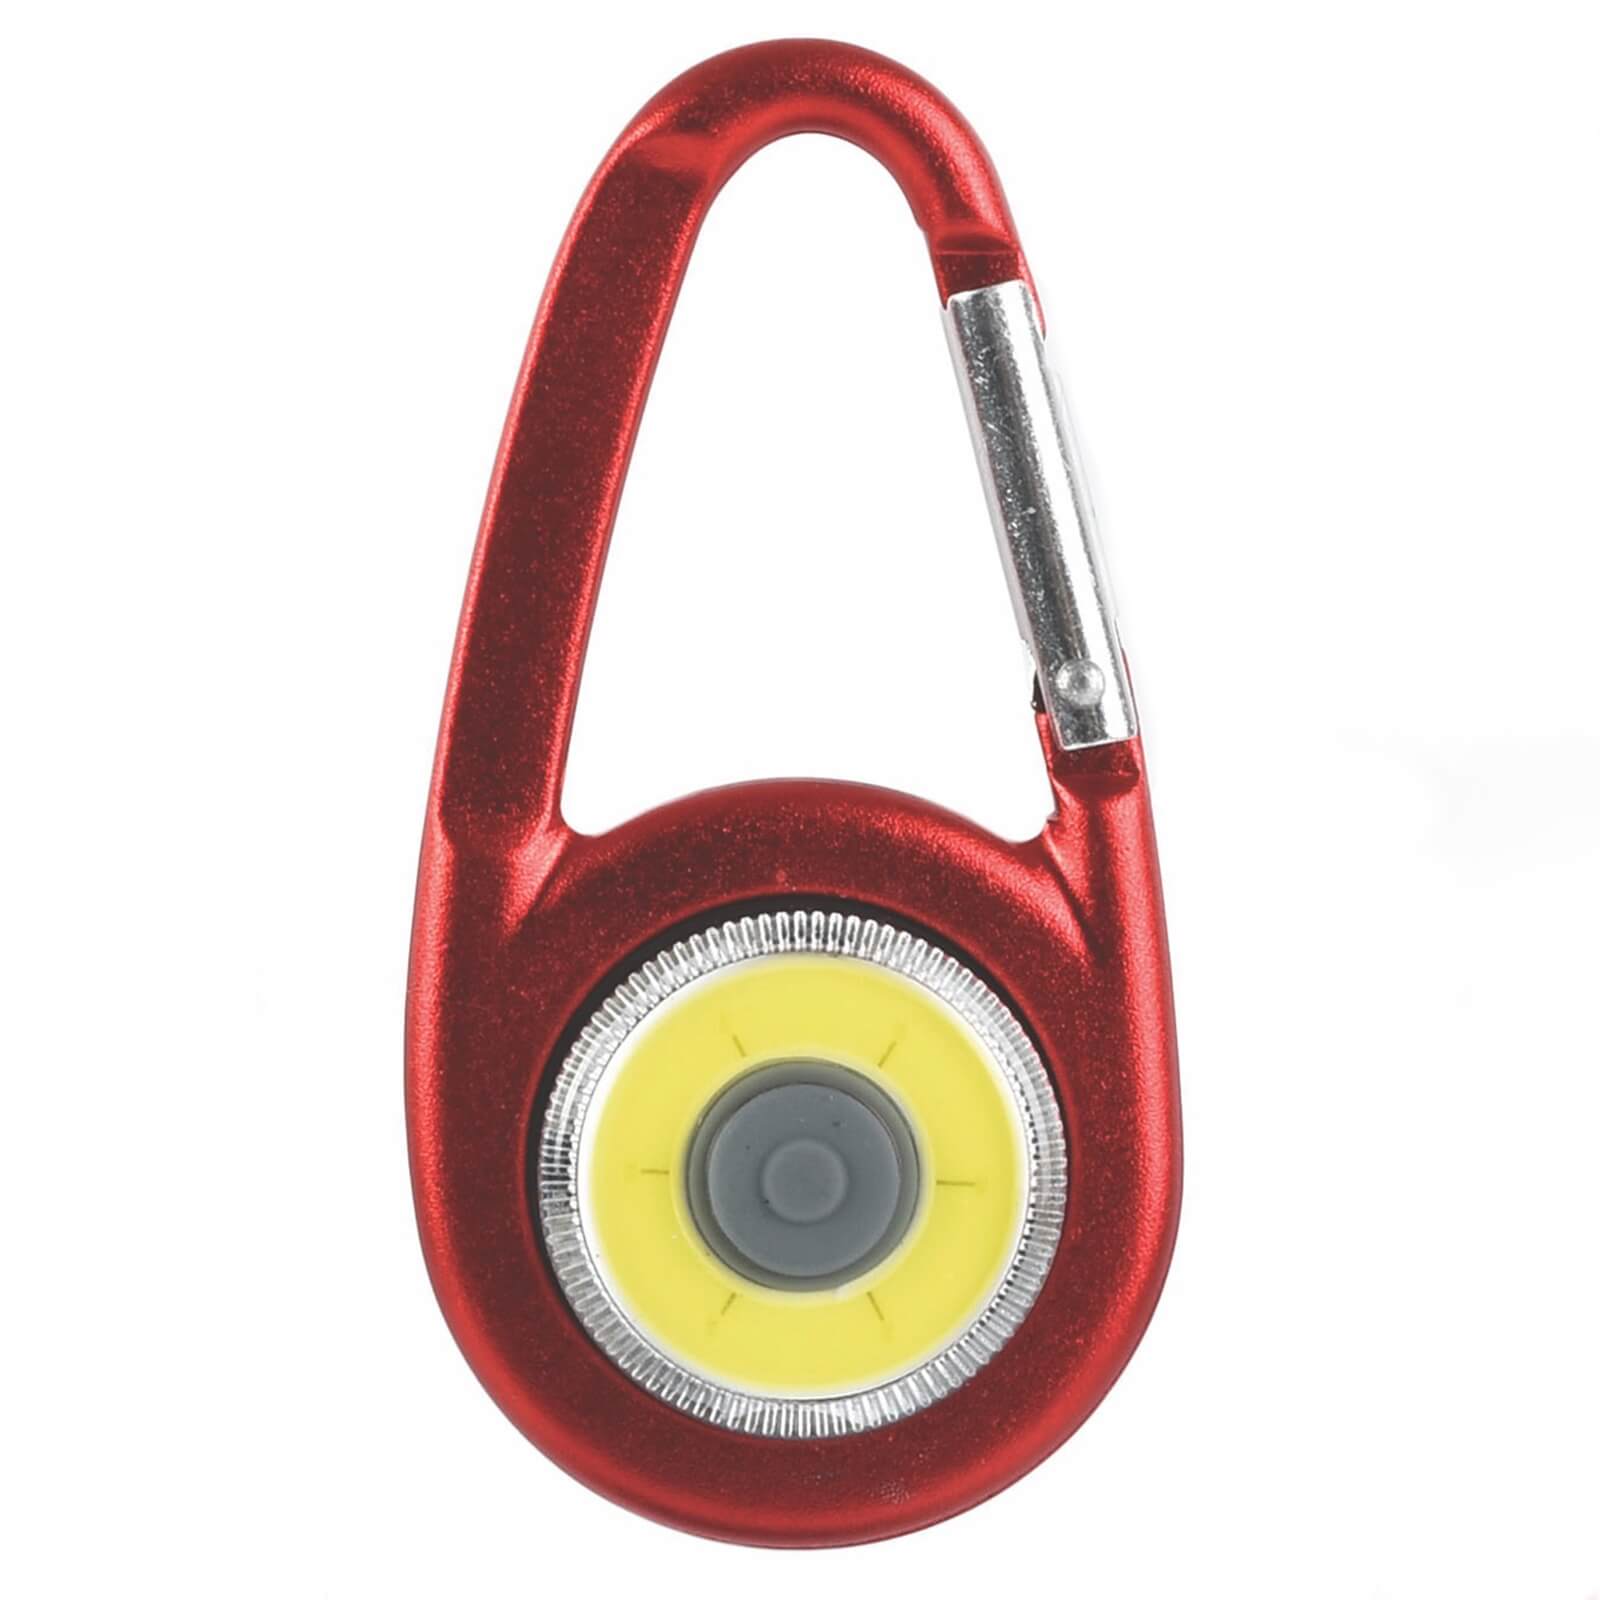 LED Torch with Carabiner